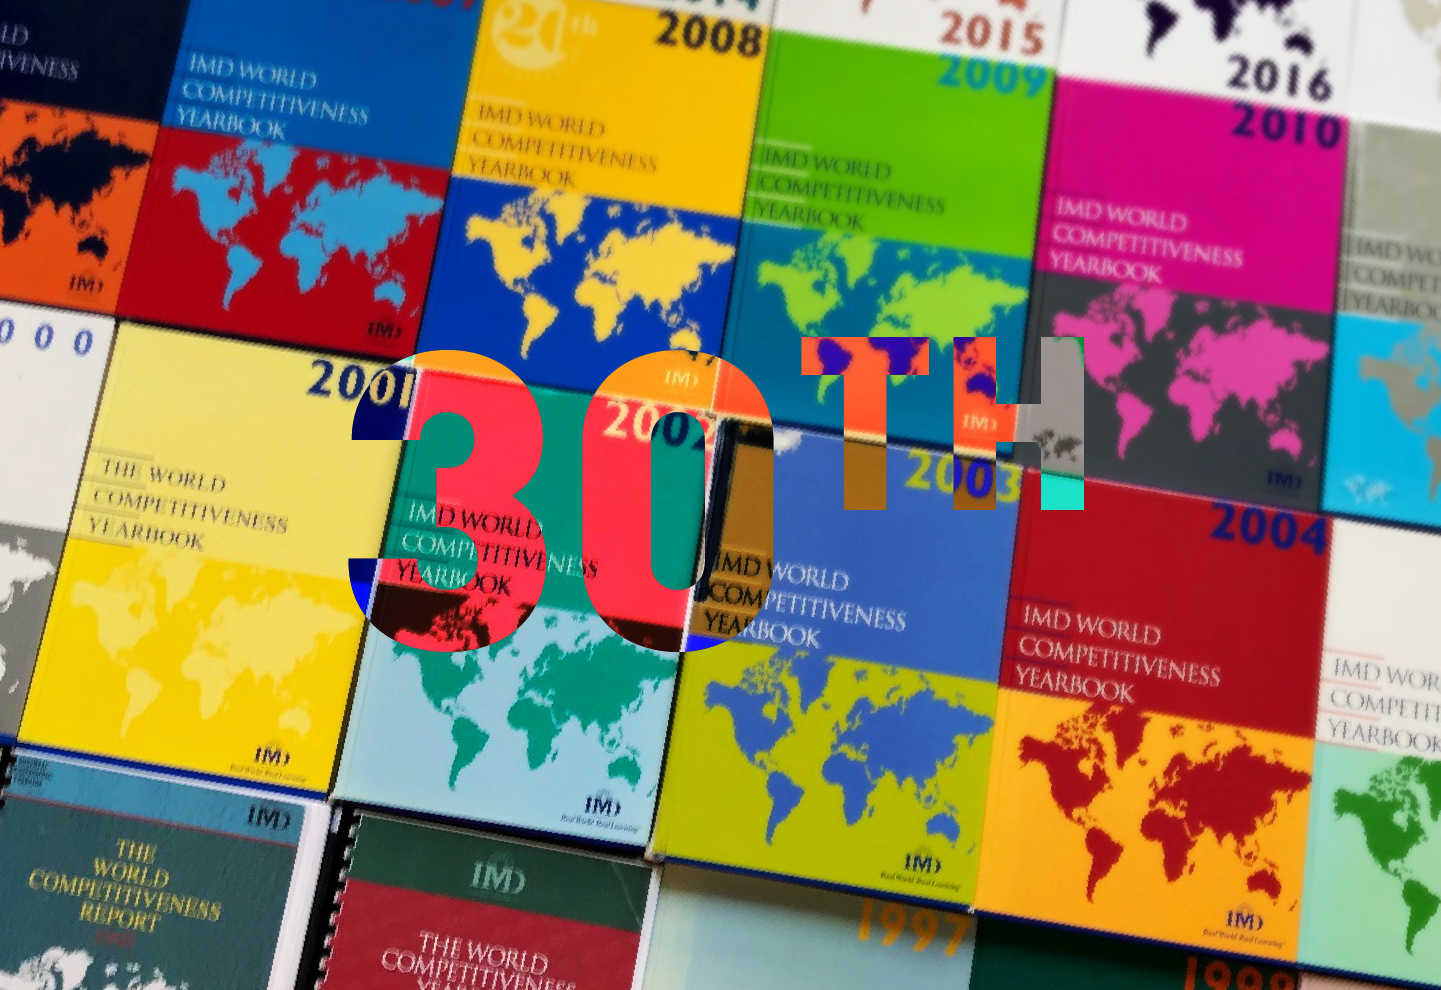 IMD World Competitiveness Yearbook: The 30th Edition